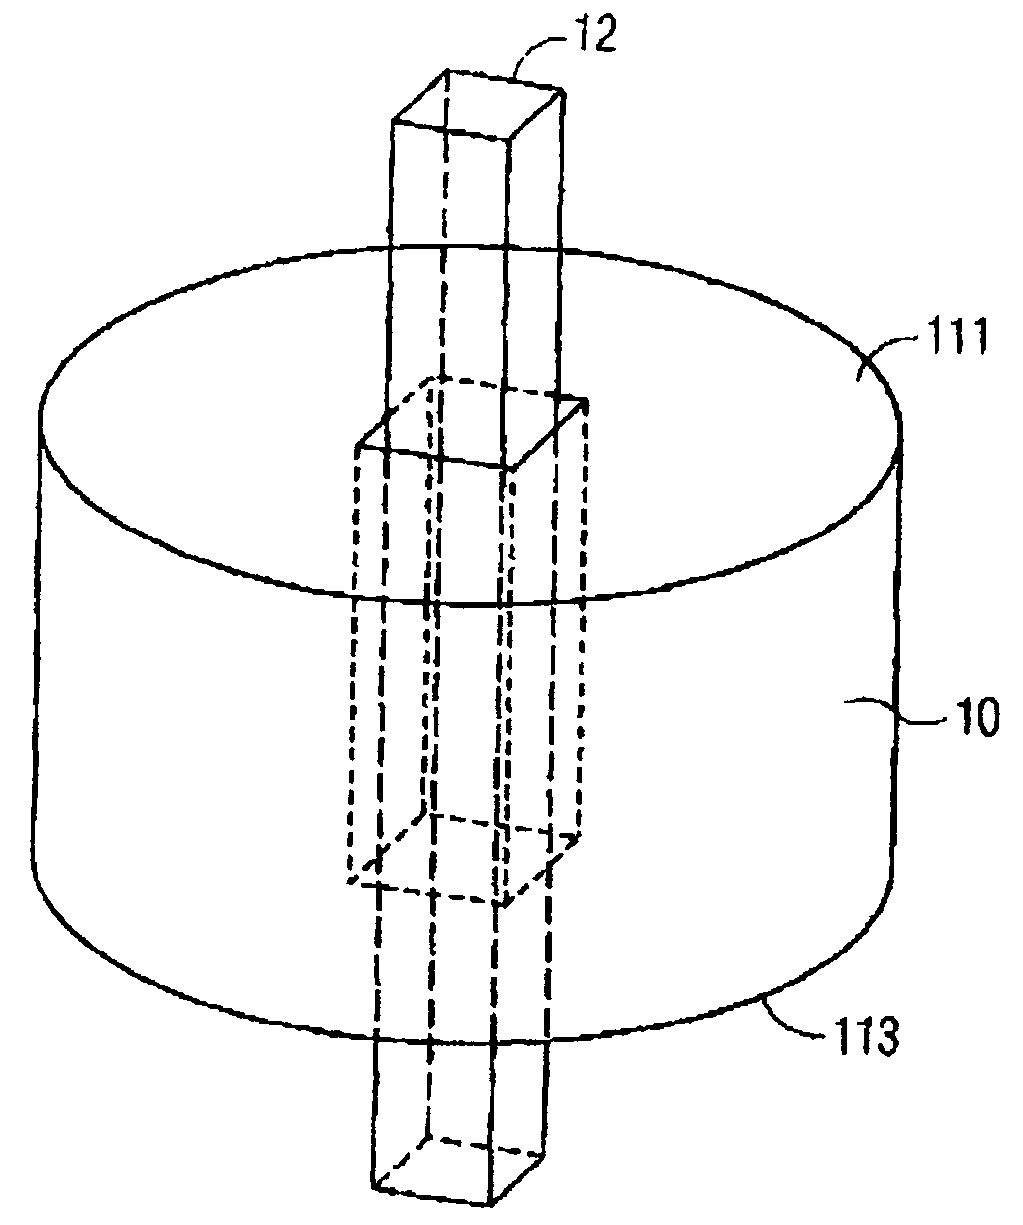 Antirotational structures for wave energy converters